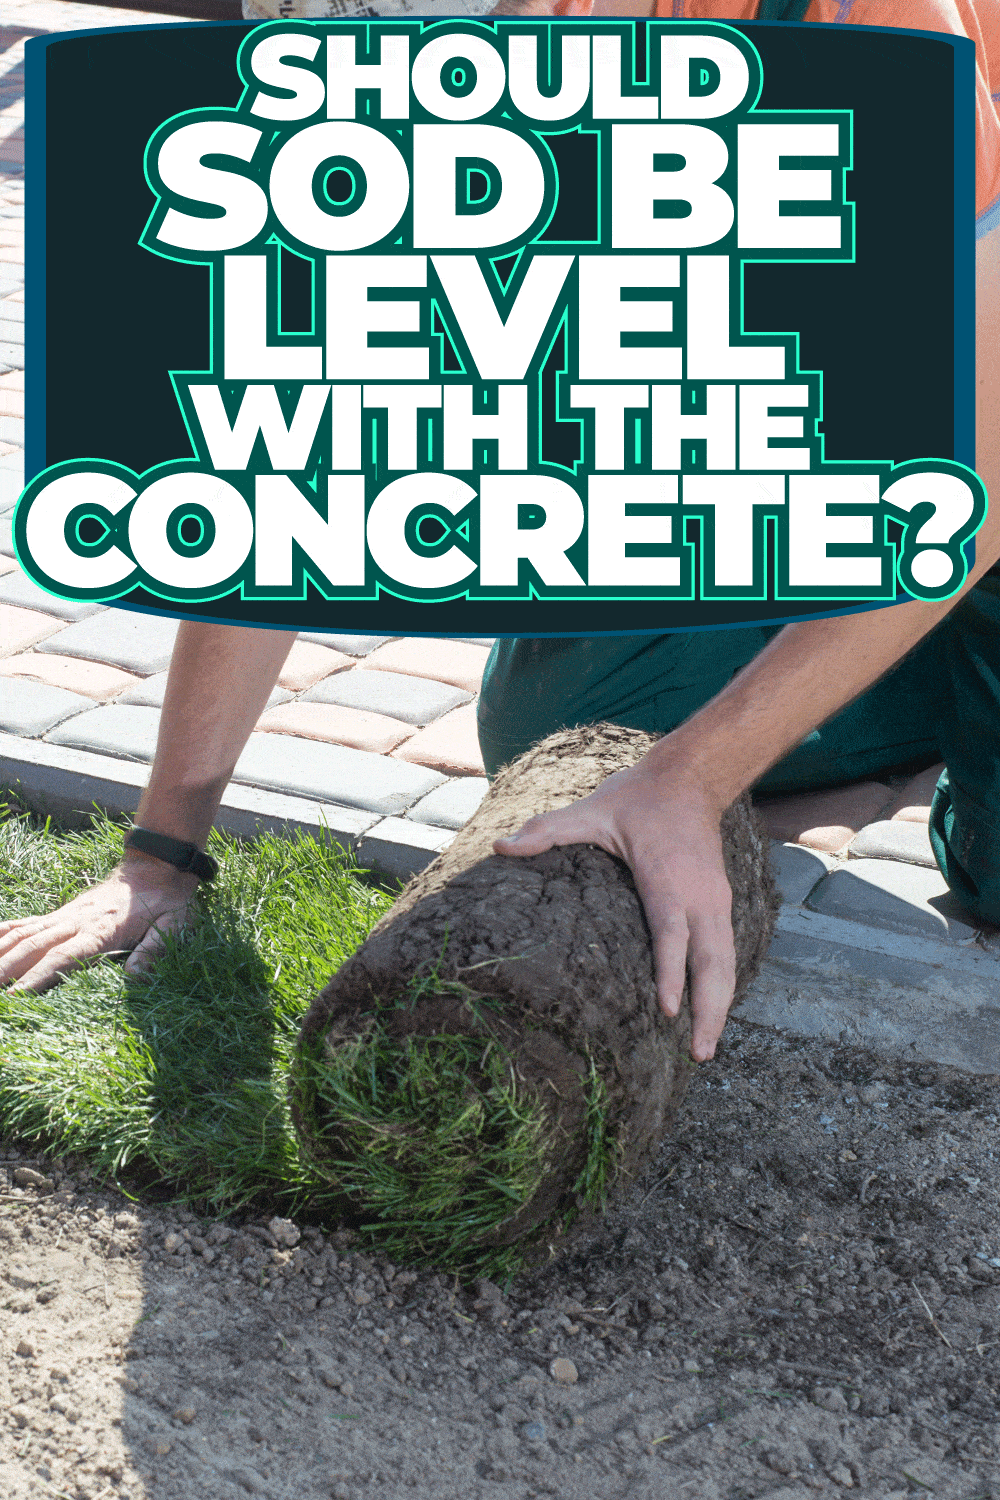 Should Sod Be Level With The Concrete?